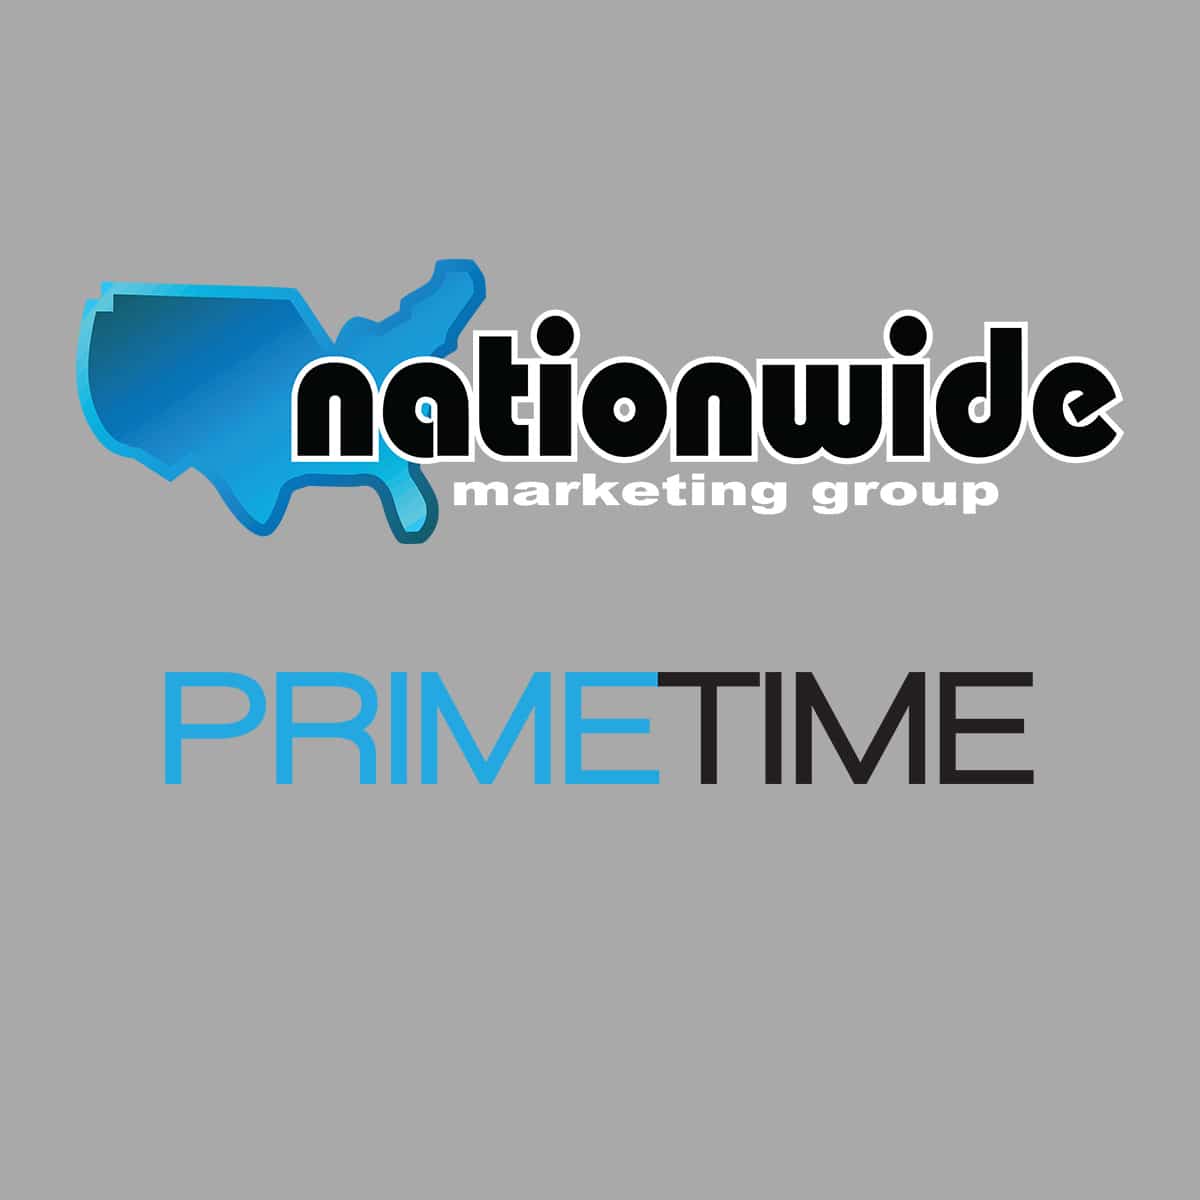 Featured image for “Full Scholarship being awarded at Nationwide Primetime 2019”